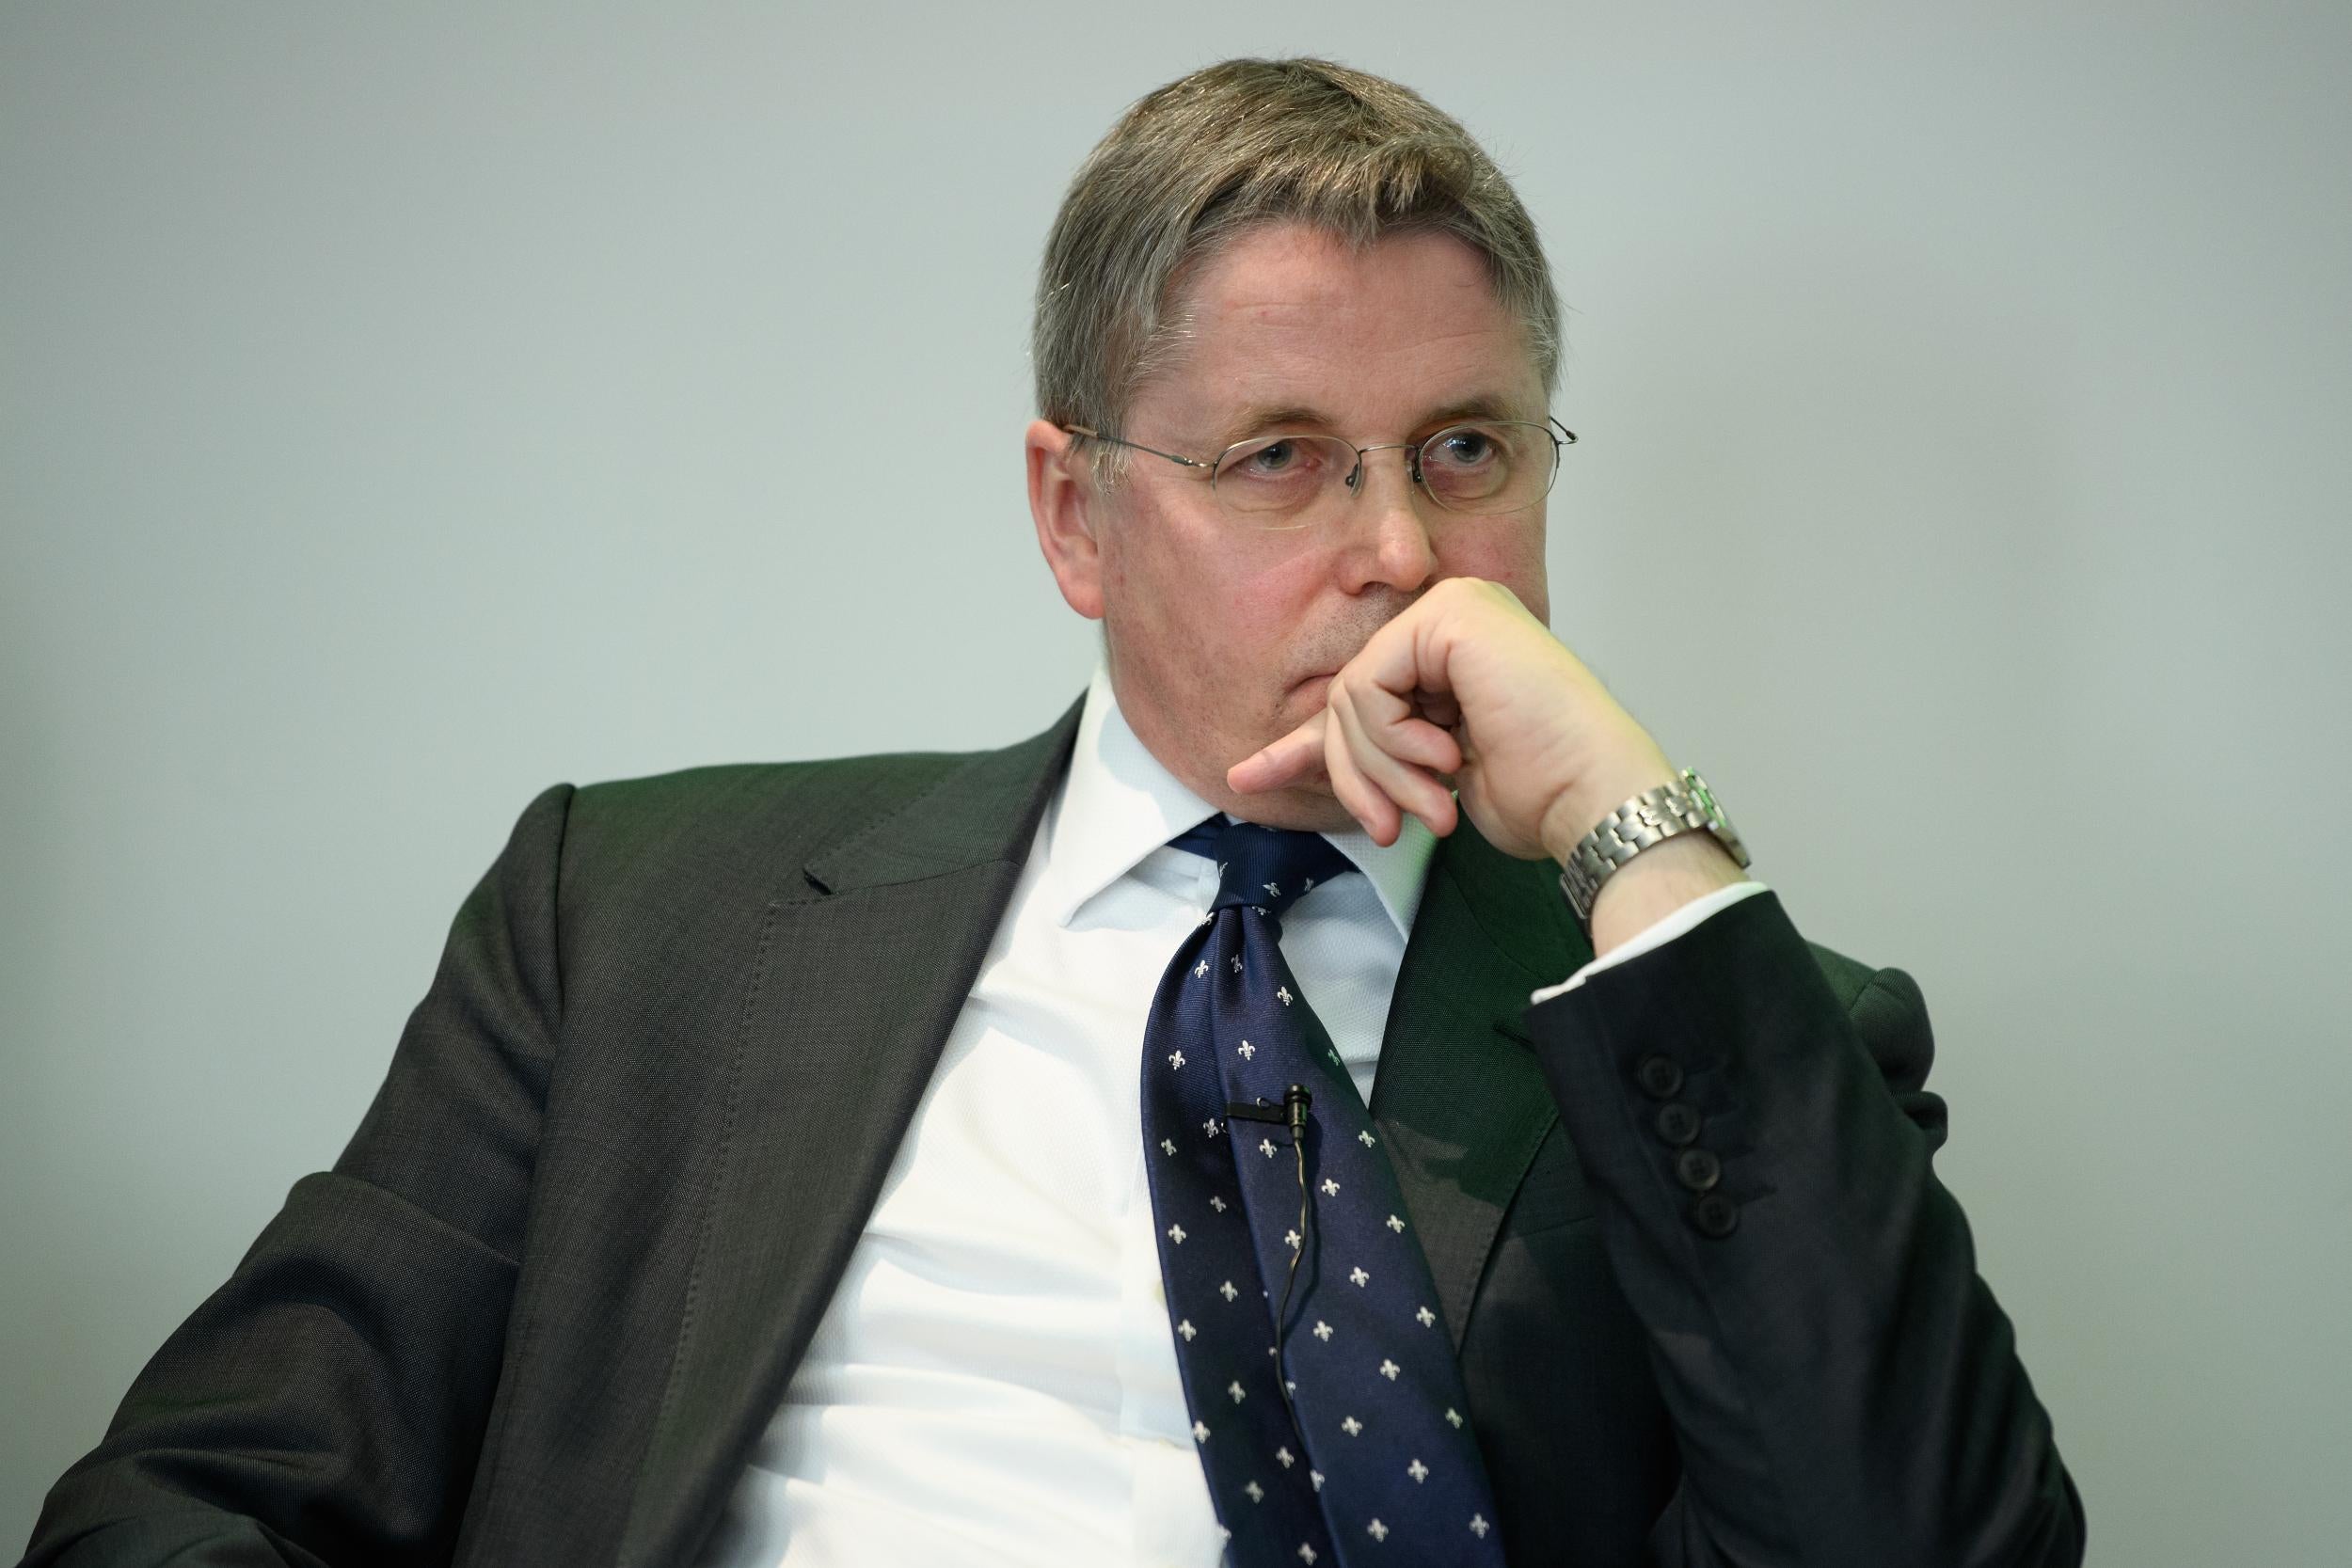 cabinet secretary sir jeremy heywood takes leave of absence for